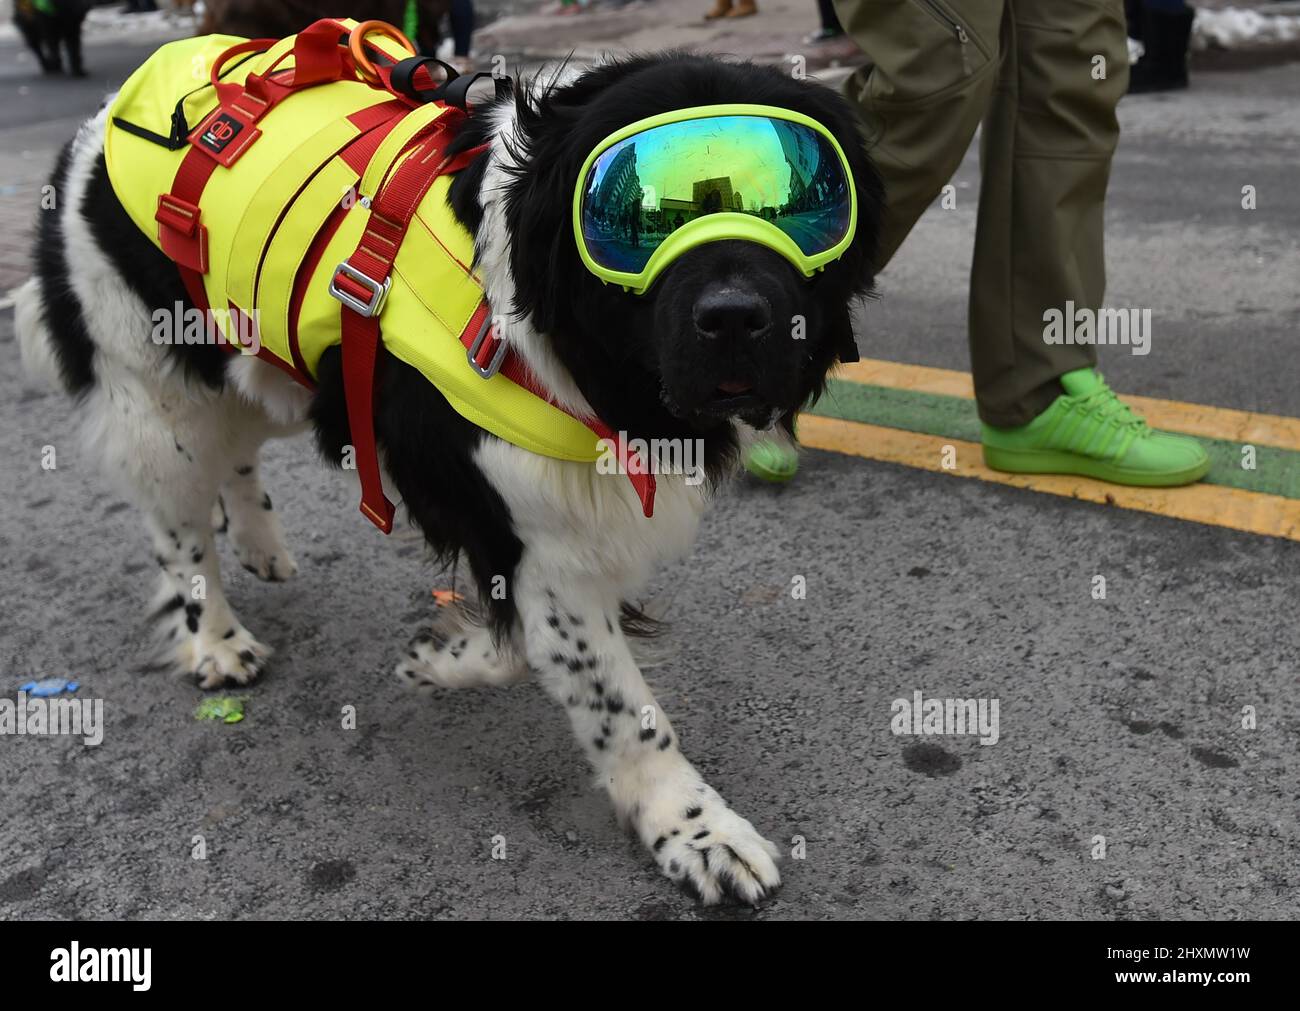 Wilkes Barre, United States. 13th Mar, 2022. A rescue dog wearing goggles seen during the Saint Patrick's Parade. Saturday's winter storm left 5 inches of snow but the Saint Patrick's Parade in Downtown Wilkes-Barre proceeded Sunday. City workers cleared streets late Saturday and early Sunday. The temperature for the parade never made it above 30 degrees. (Photo by Aimee Dilger/ SOPA Images/Sipa USA) Credit: Sipa USA/Alamy Live News Stock Photo